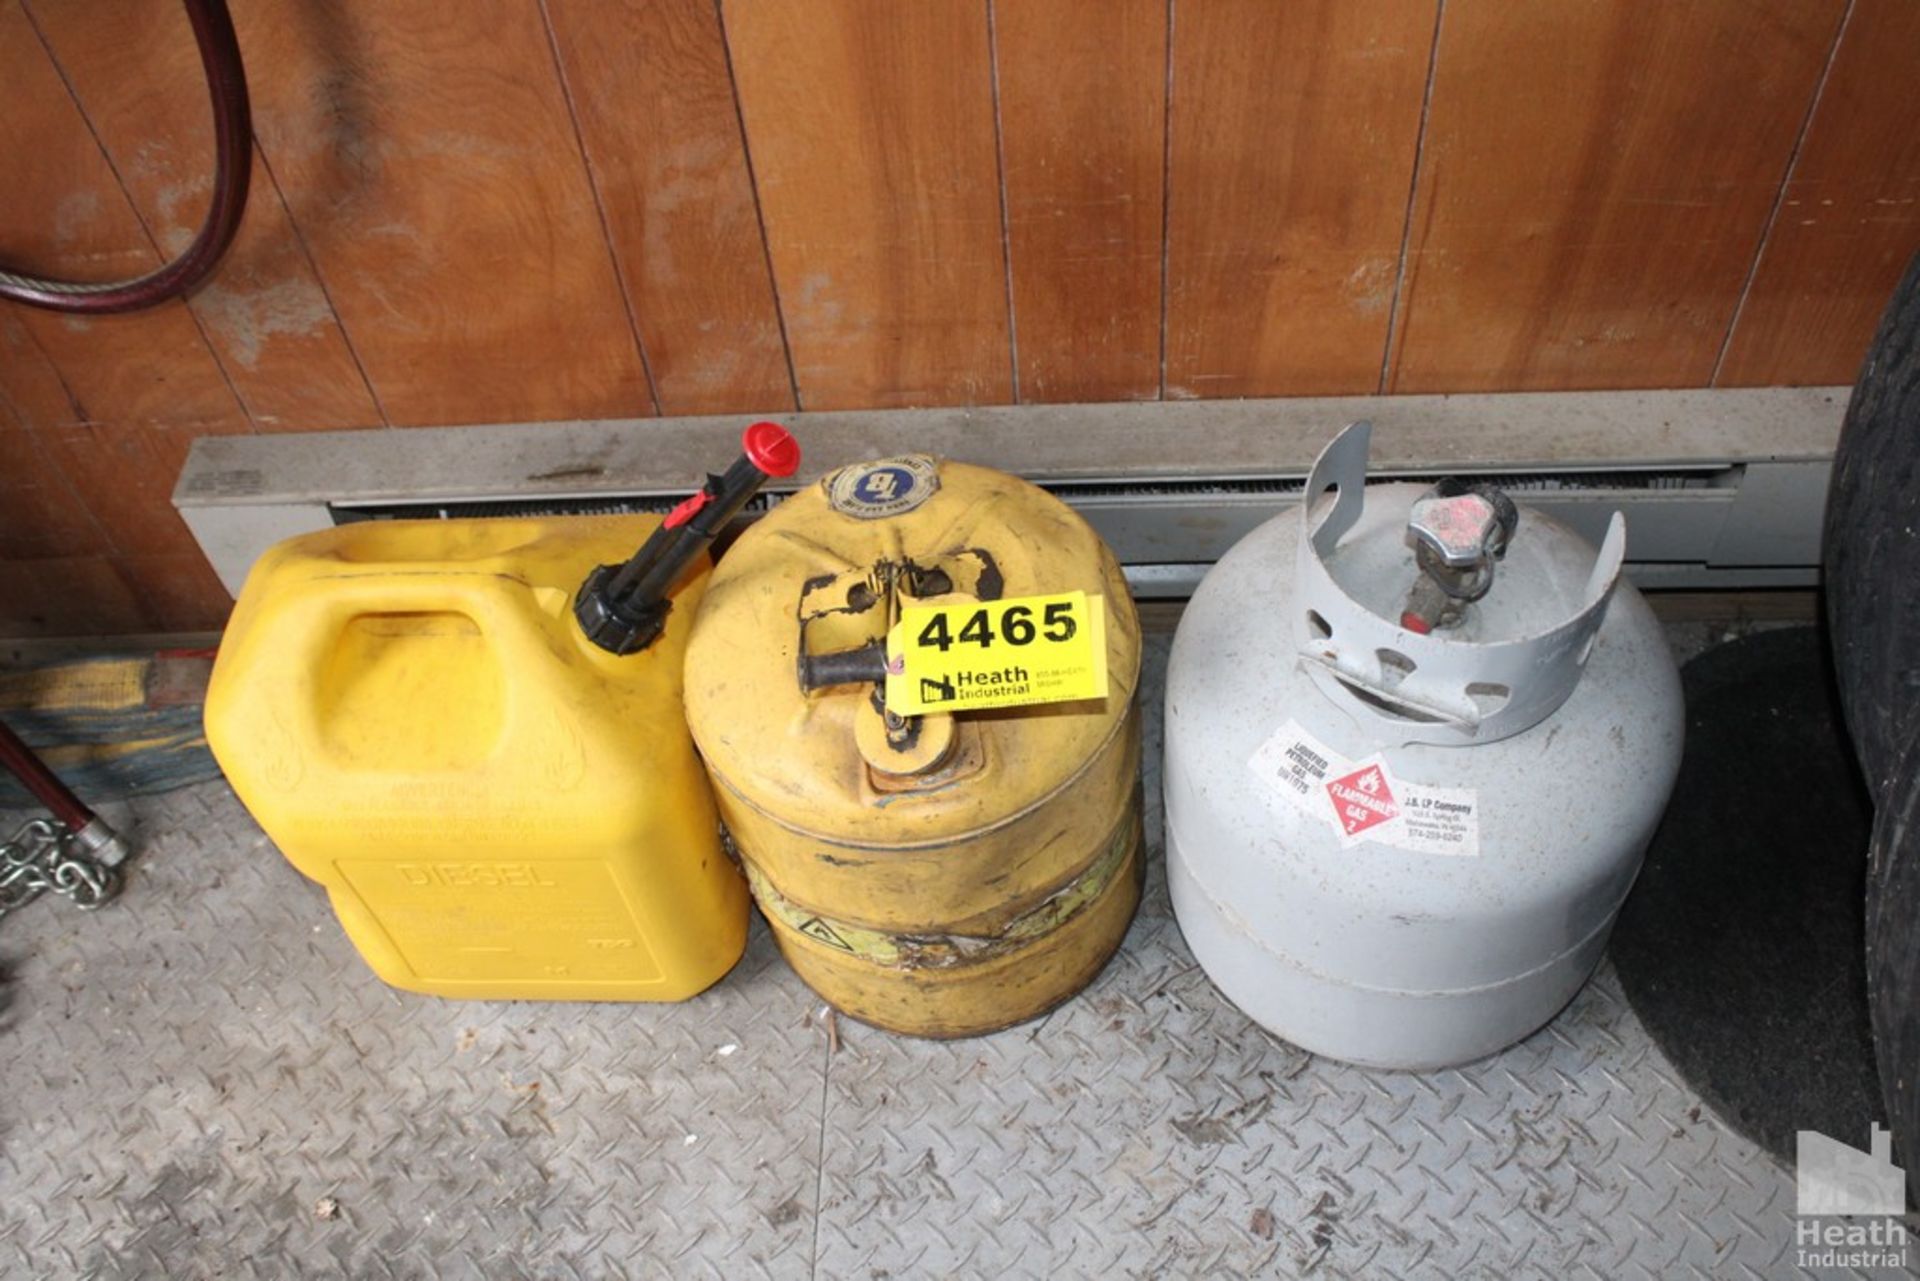 (2) FUEL CANS AND PROPANE TANK